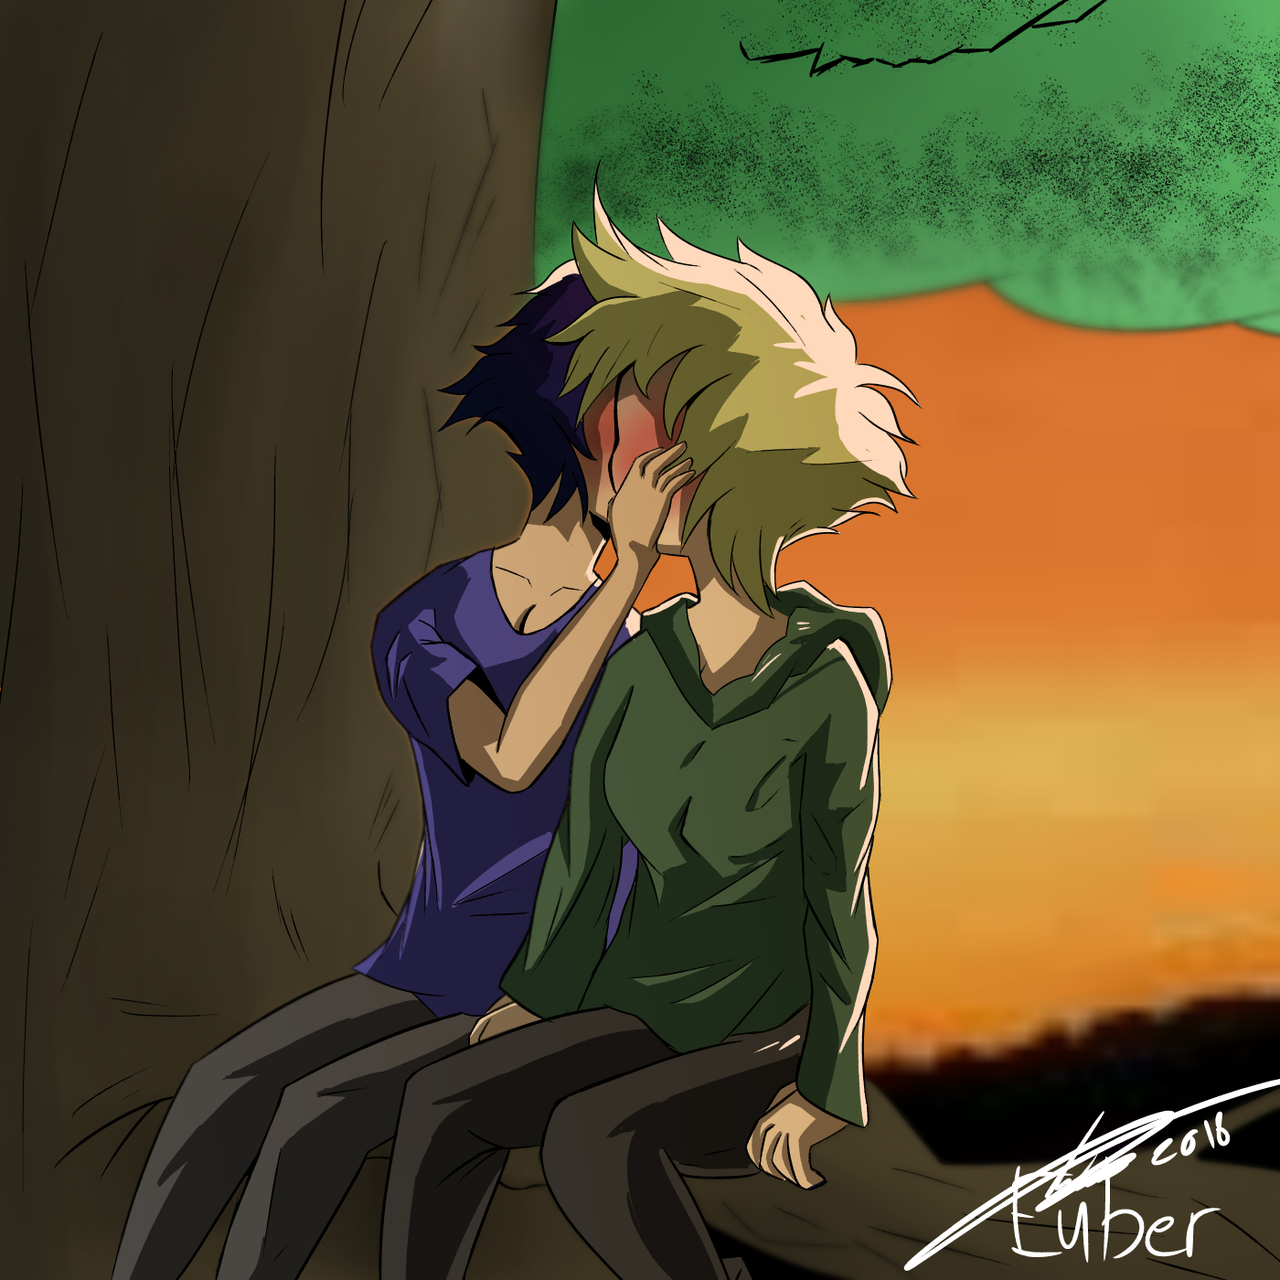 Lapis and Peridot, Sitting on a tree, K-I-S-S-I-N-G :D (This Idea was made by @blackforest-artz :). Its all thanks to her :D)